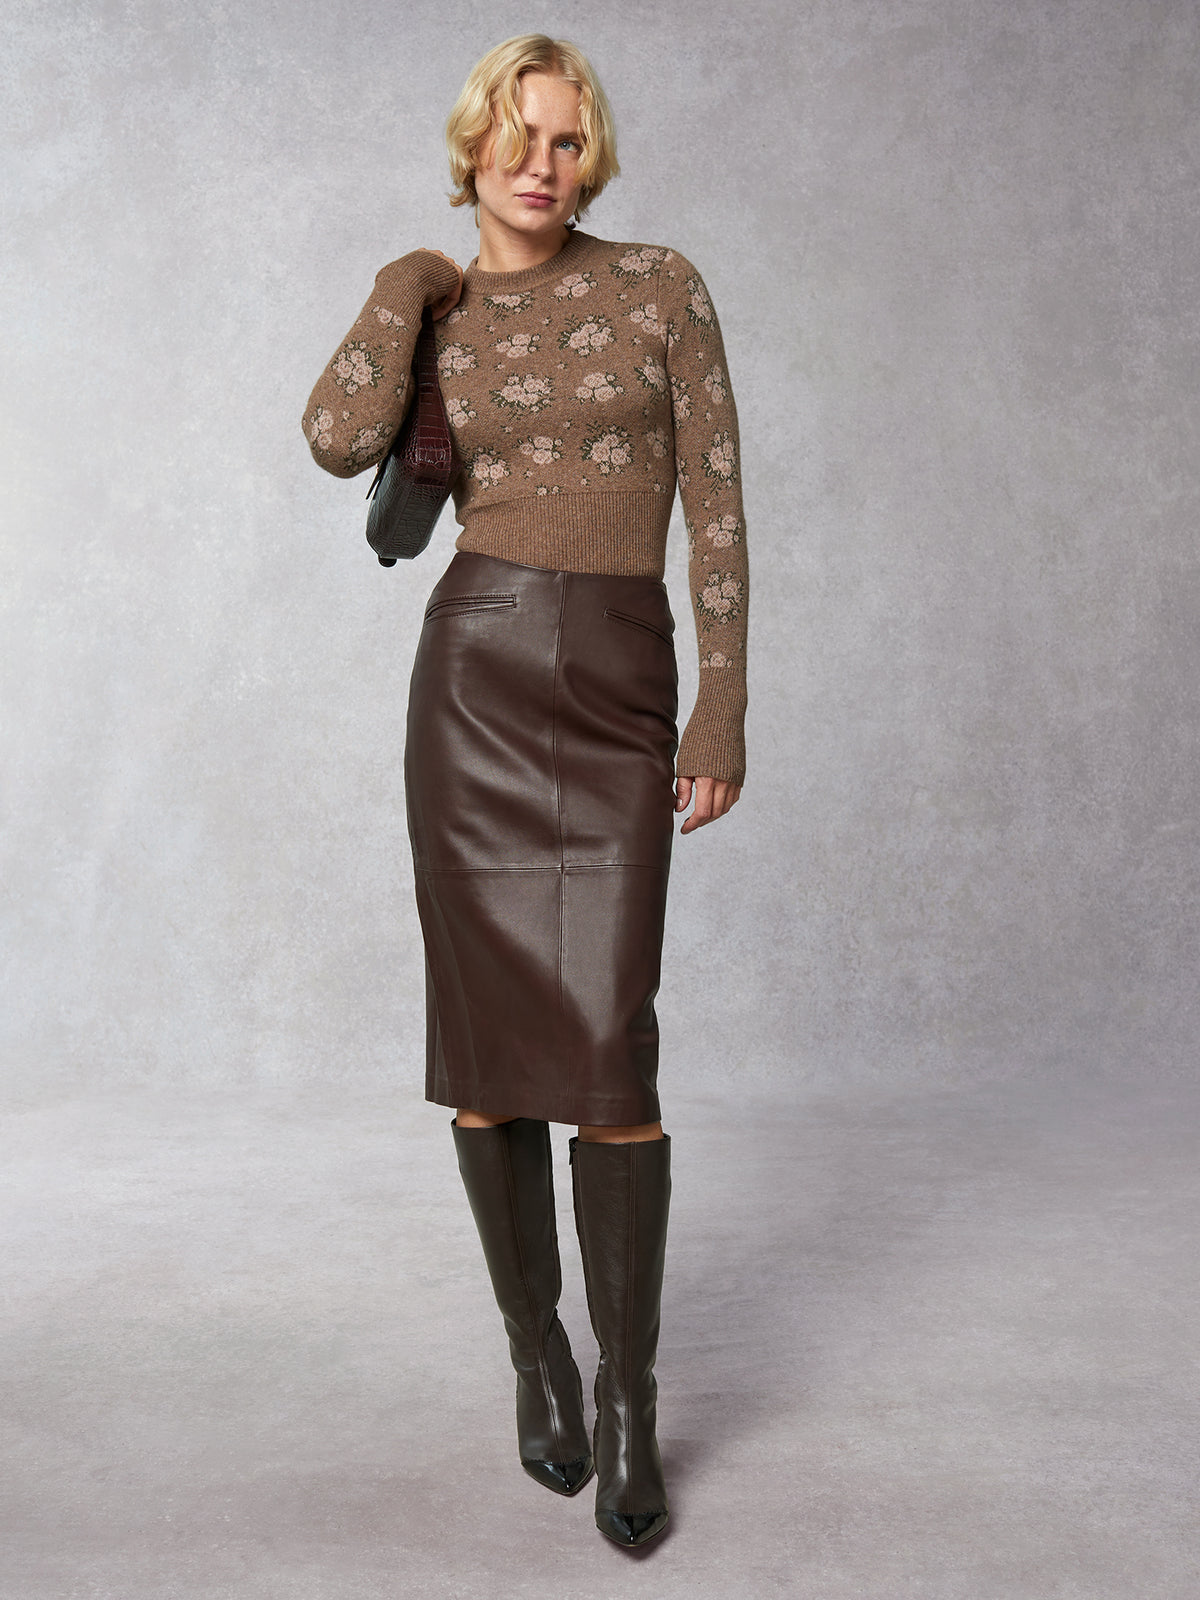 Chocolate leather pencil skirt